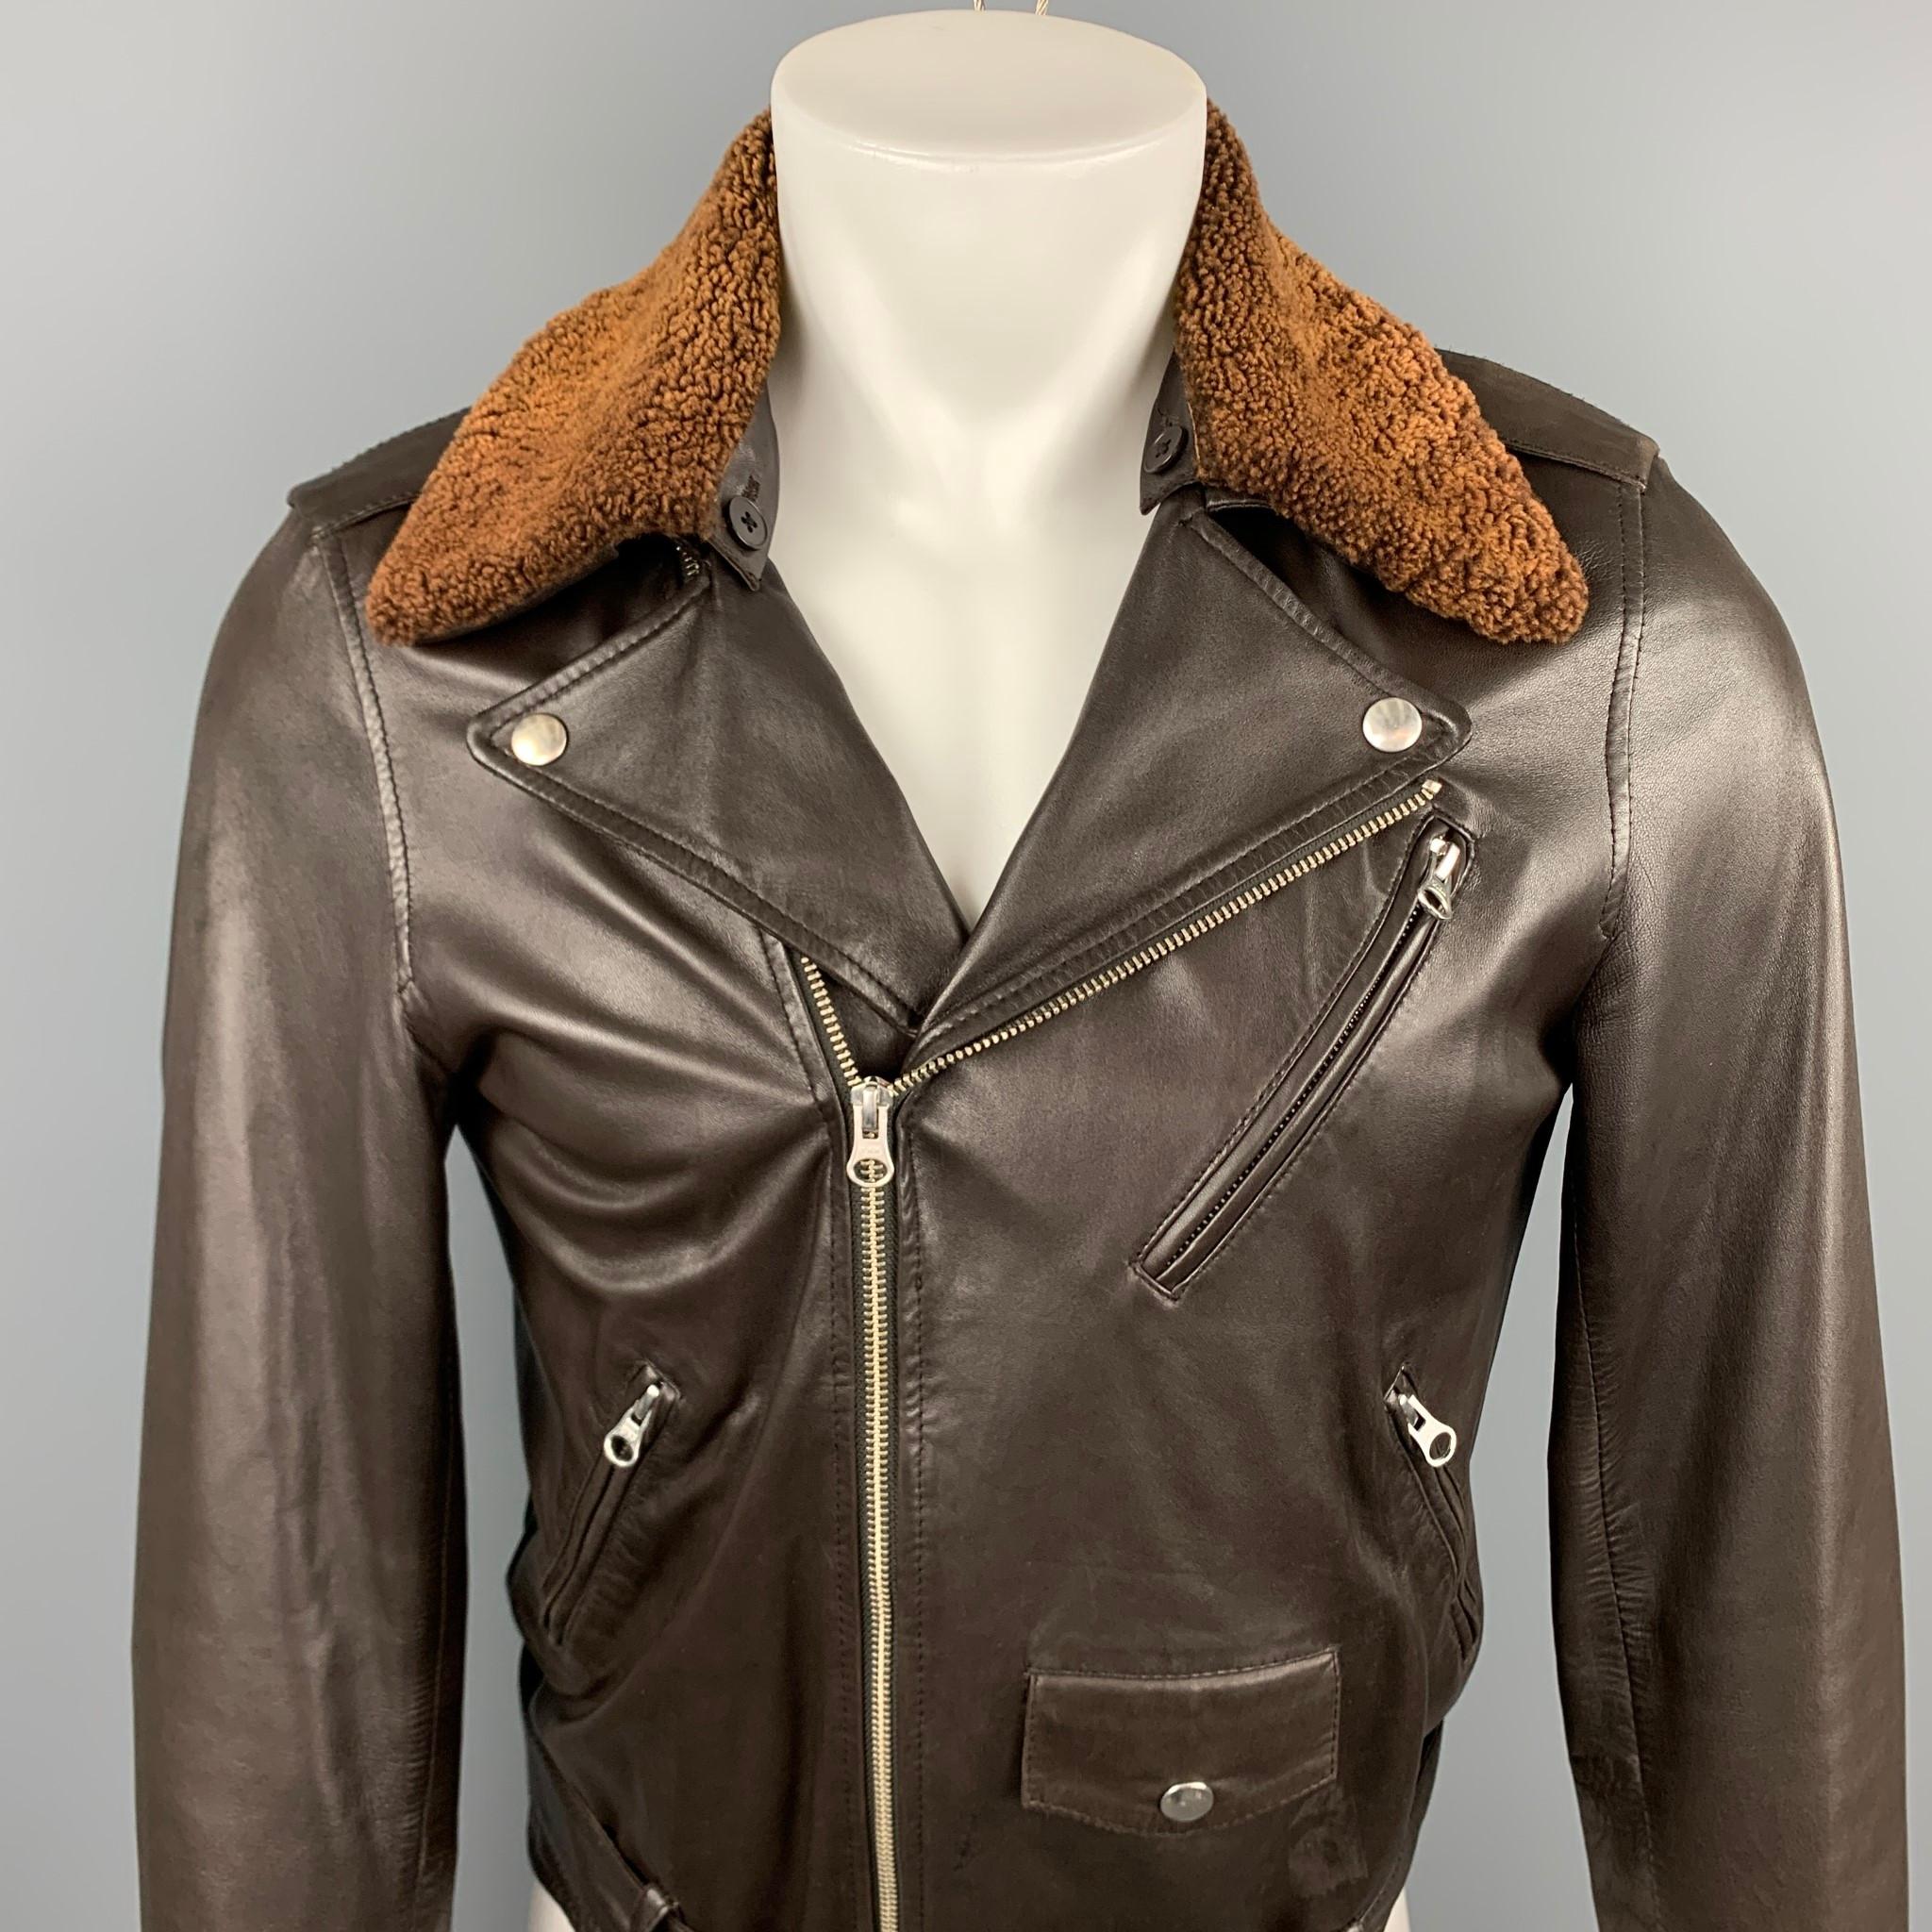 A.P.C jacket comes in a brown leather with a full liner featuring a biker style, detachable collar, epaulettes, zipper pockets, belted, and a zip up closure.

Very Good Pre-Owned Condition.
Marked: XS

Measurements:

Shoulder: 18 in.
Chest: 38